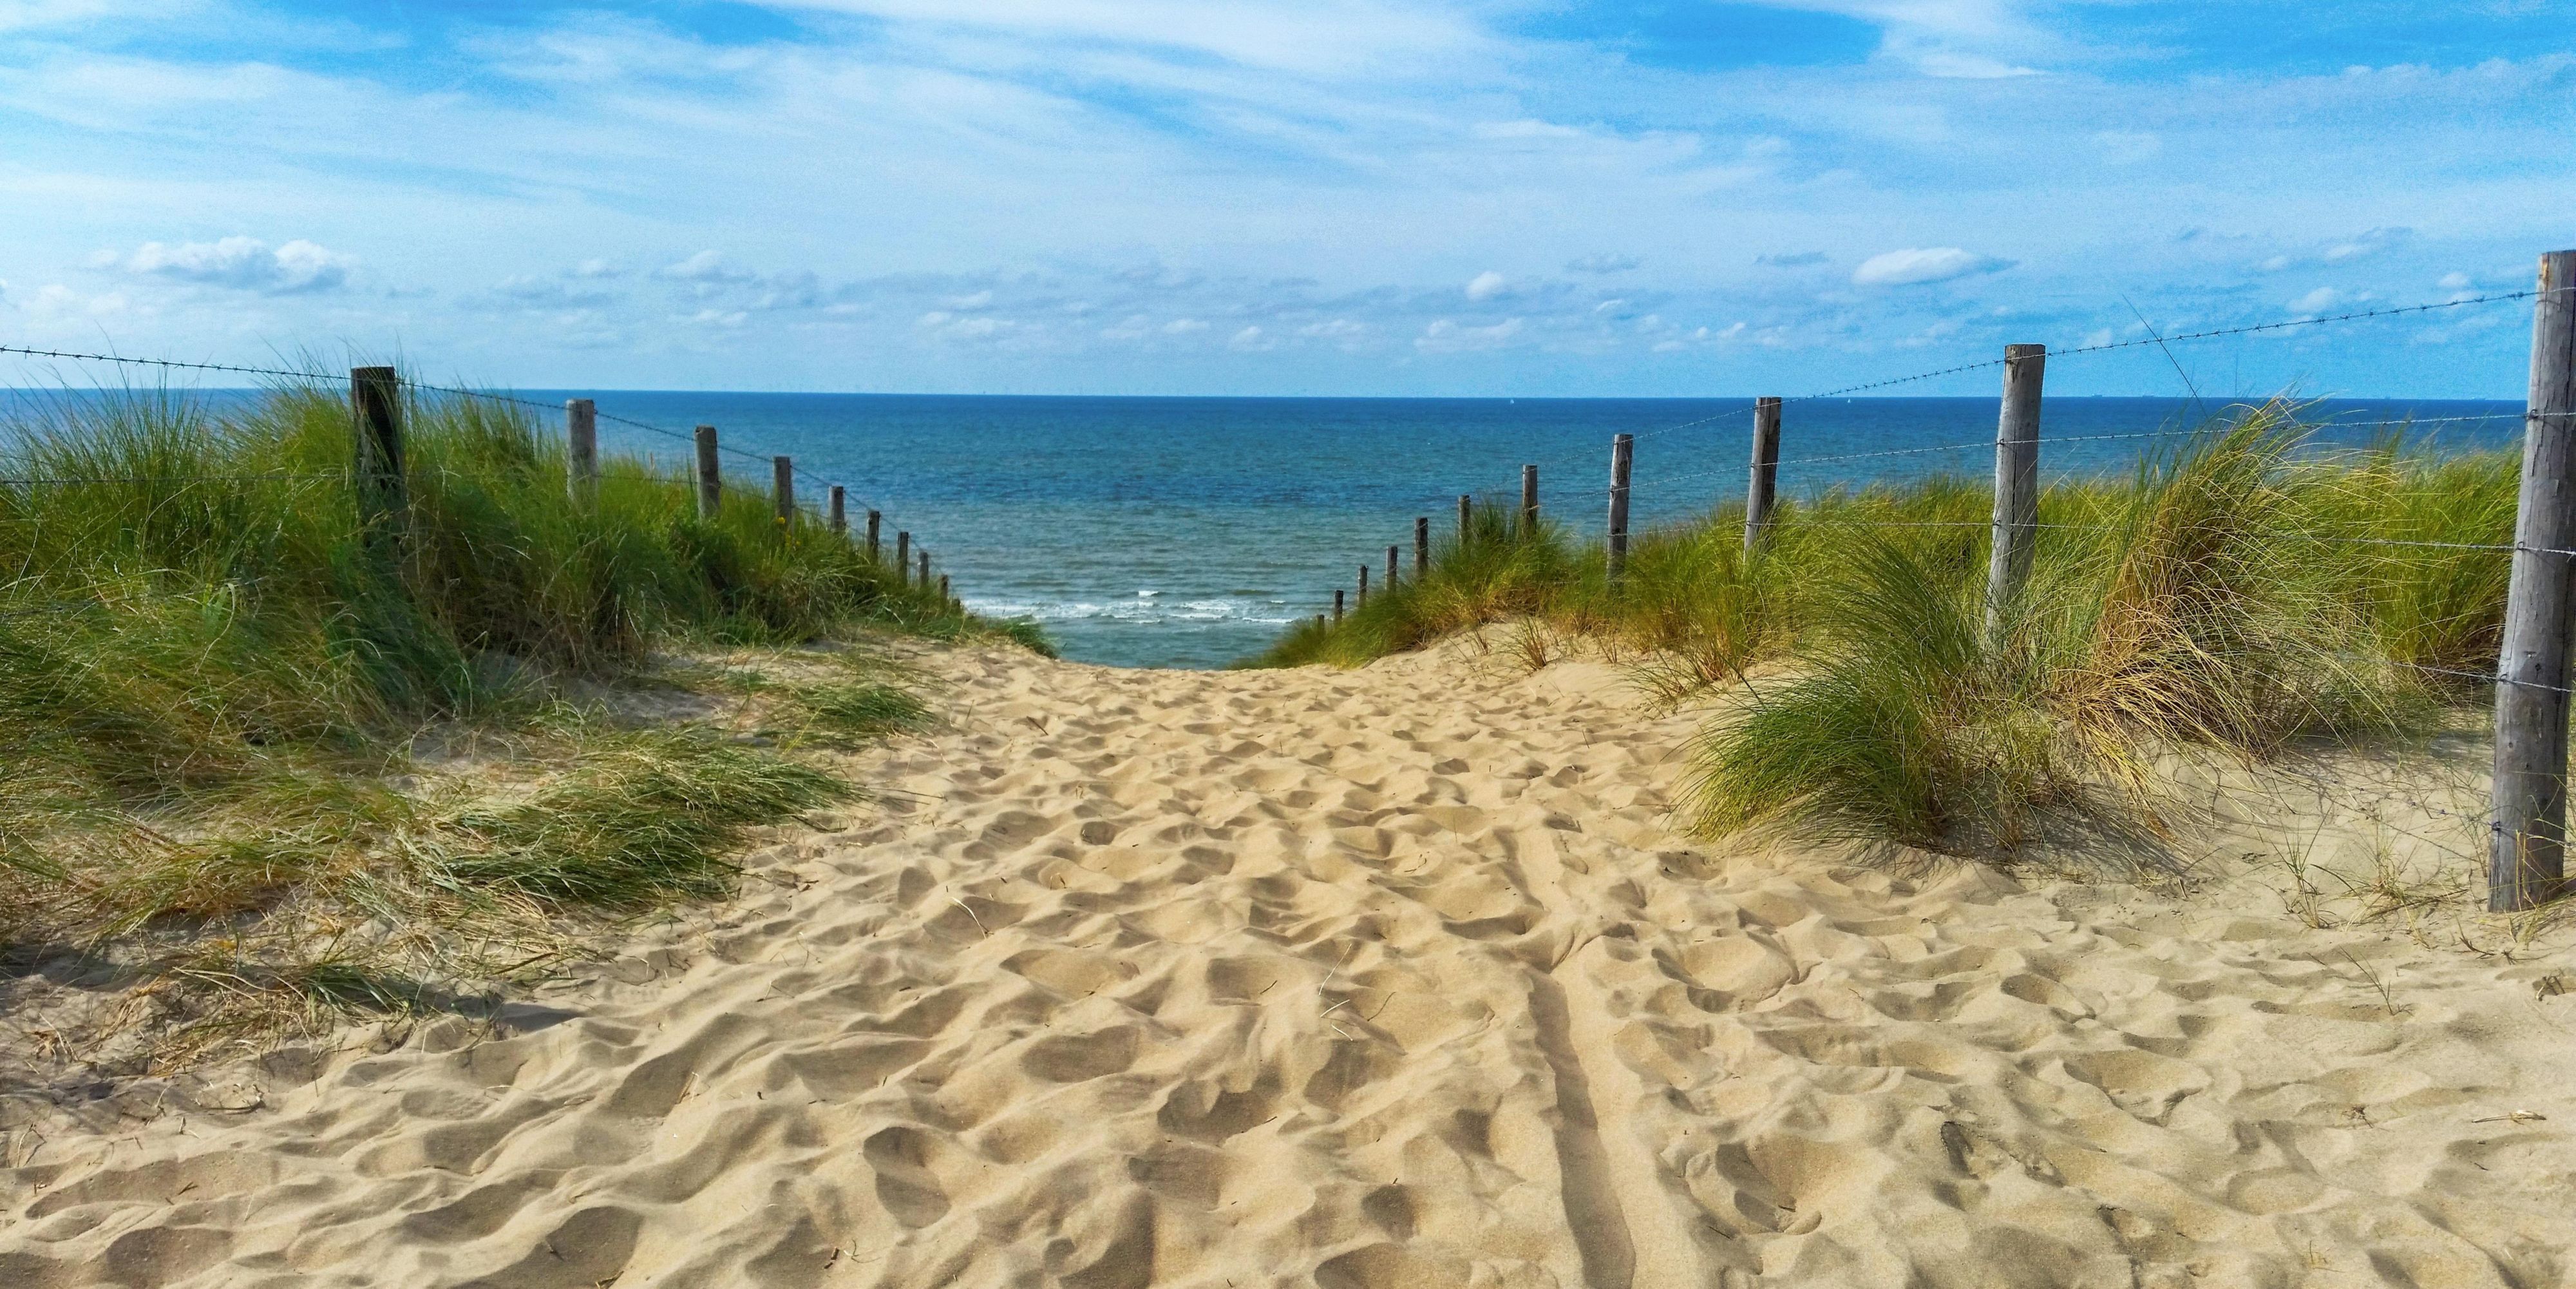 The hotel is located just 15 short minutes from the Indiana Dunes National Park. Guests can either relax on the beaches or exercise with a hike through the dunes.